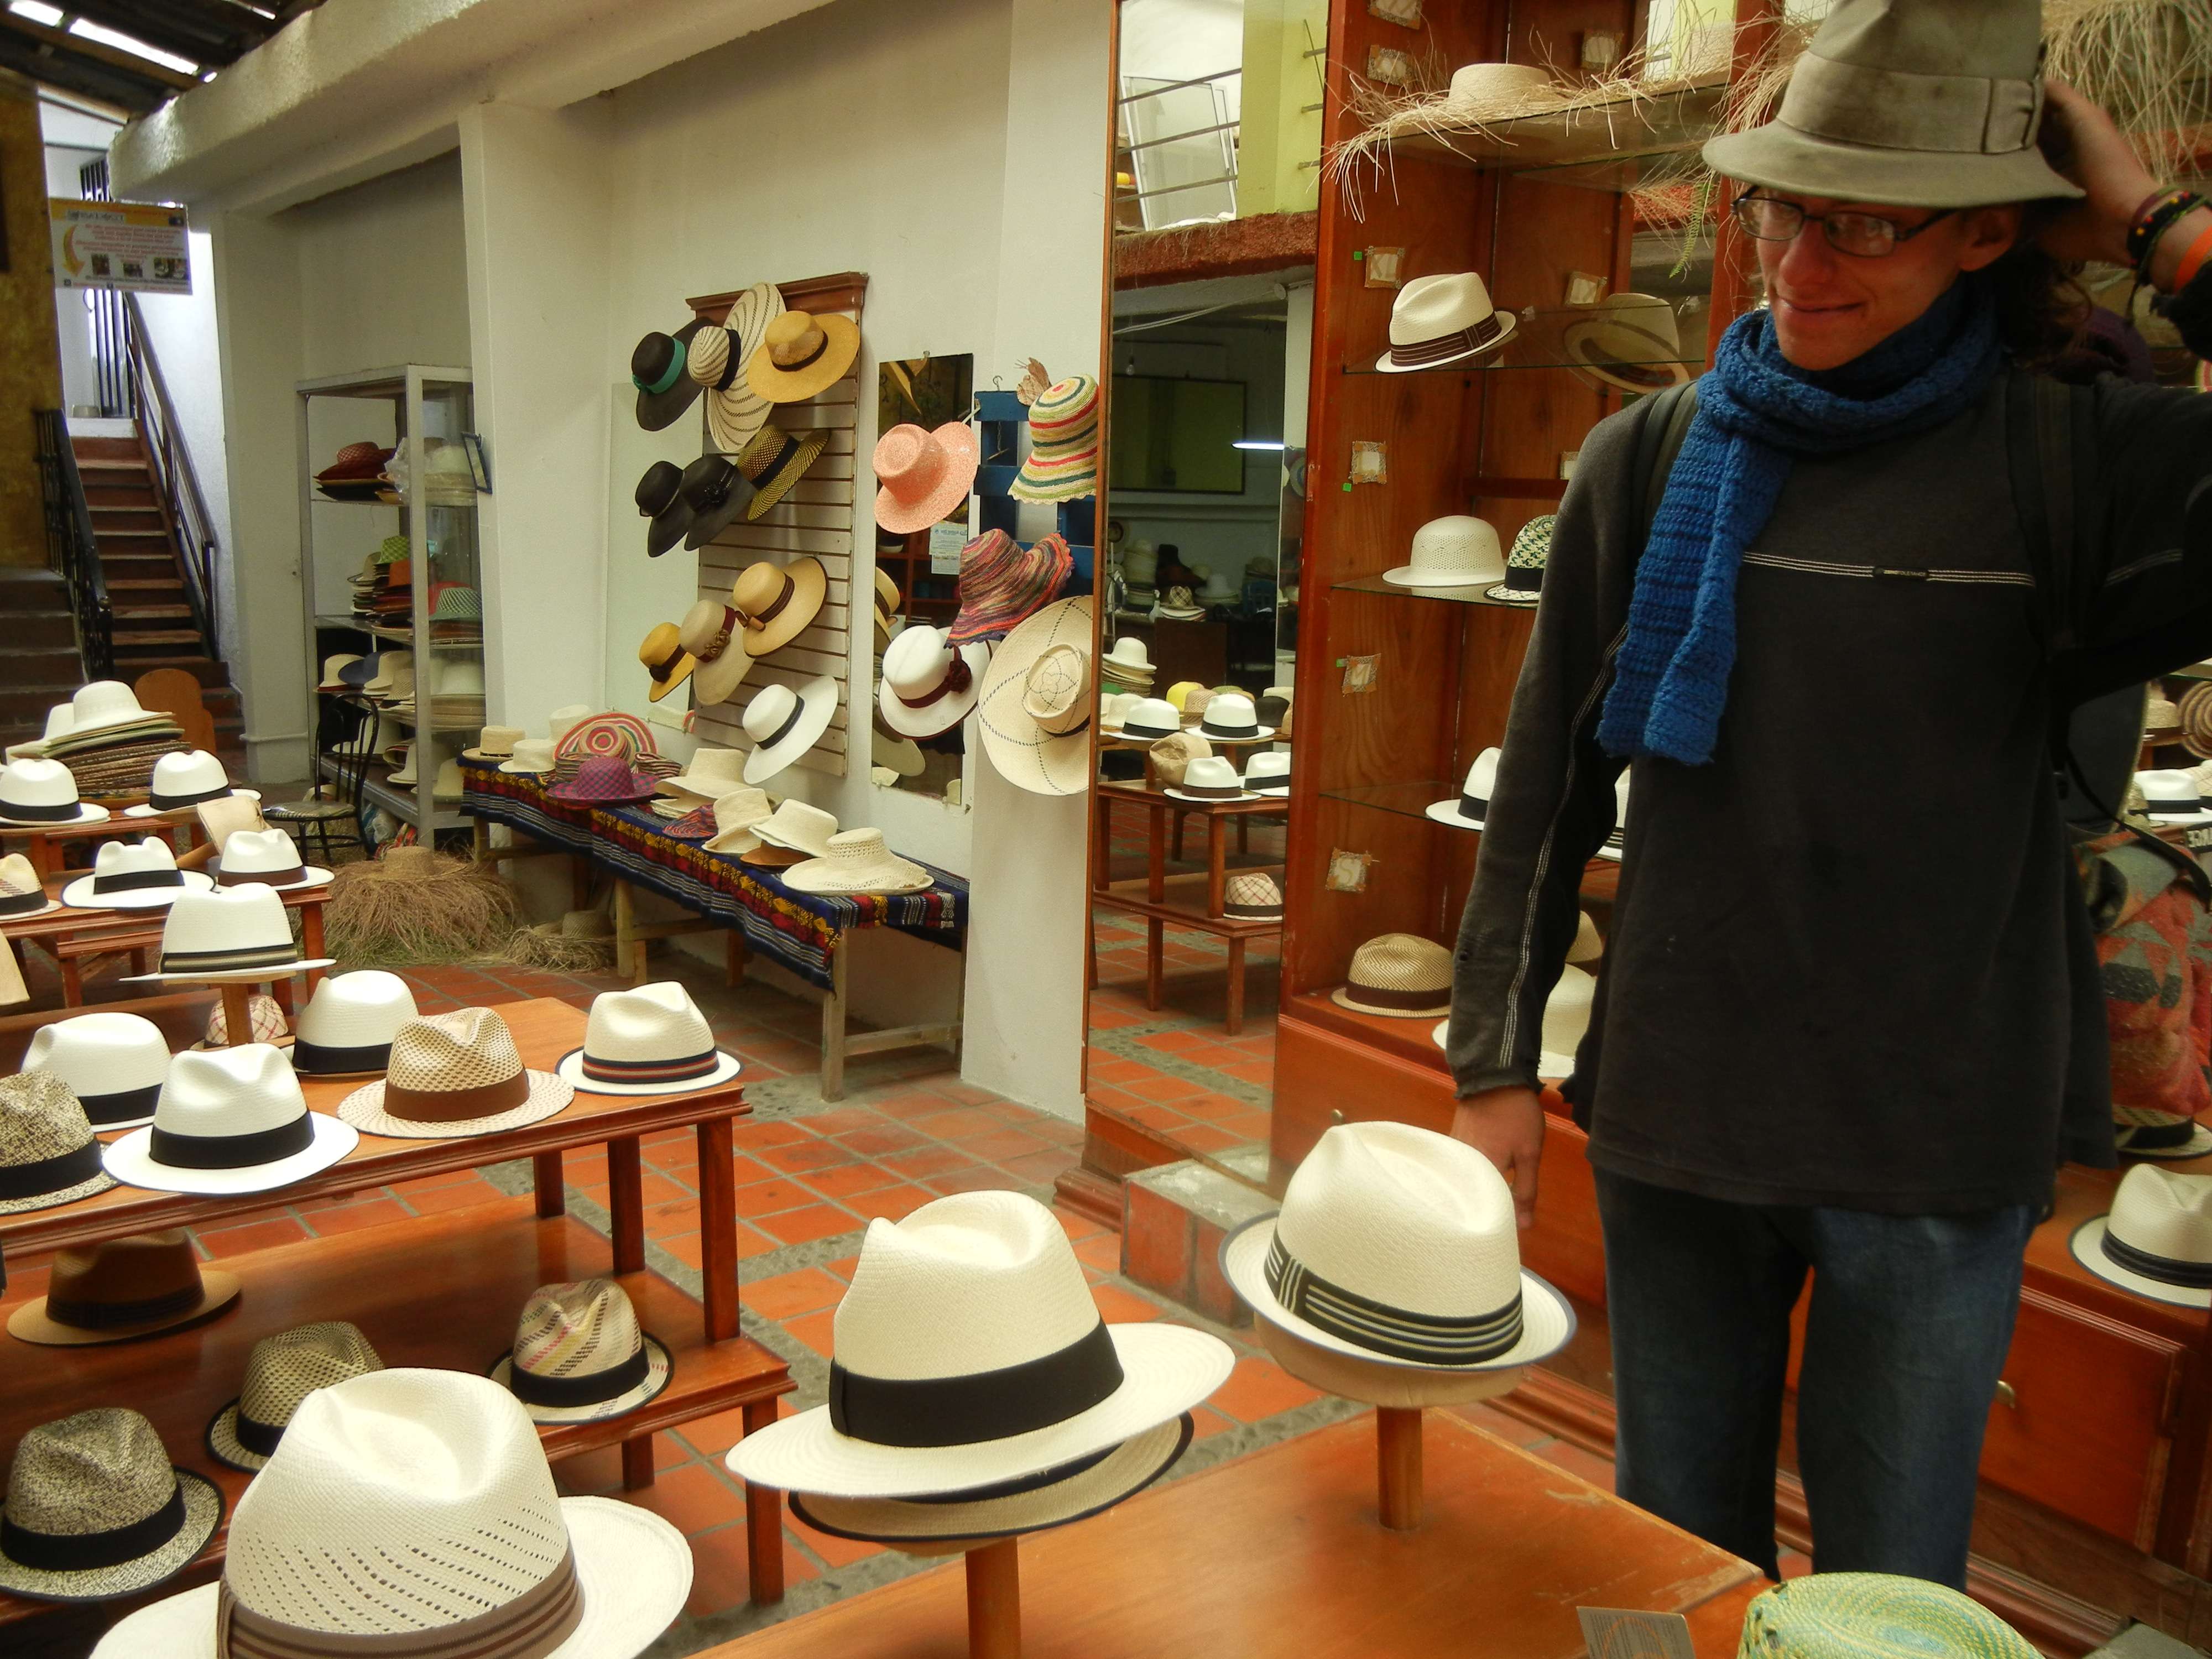 Me trying on new hats in the Panama Hat Museum